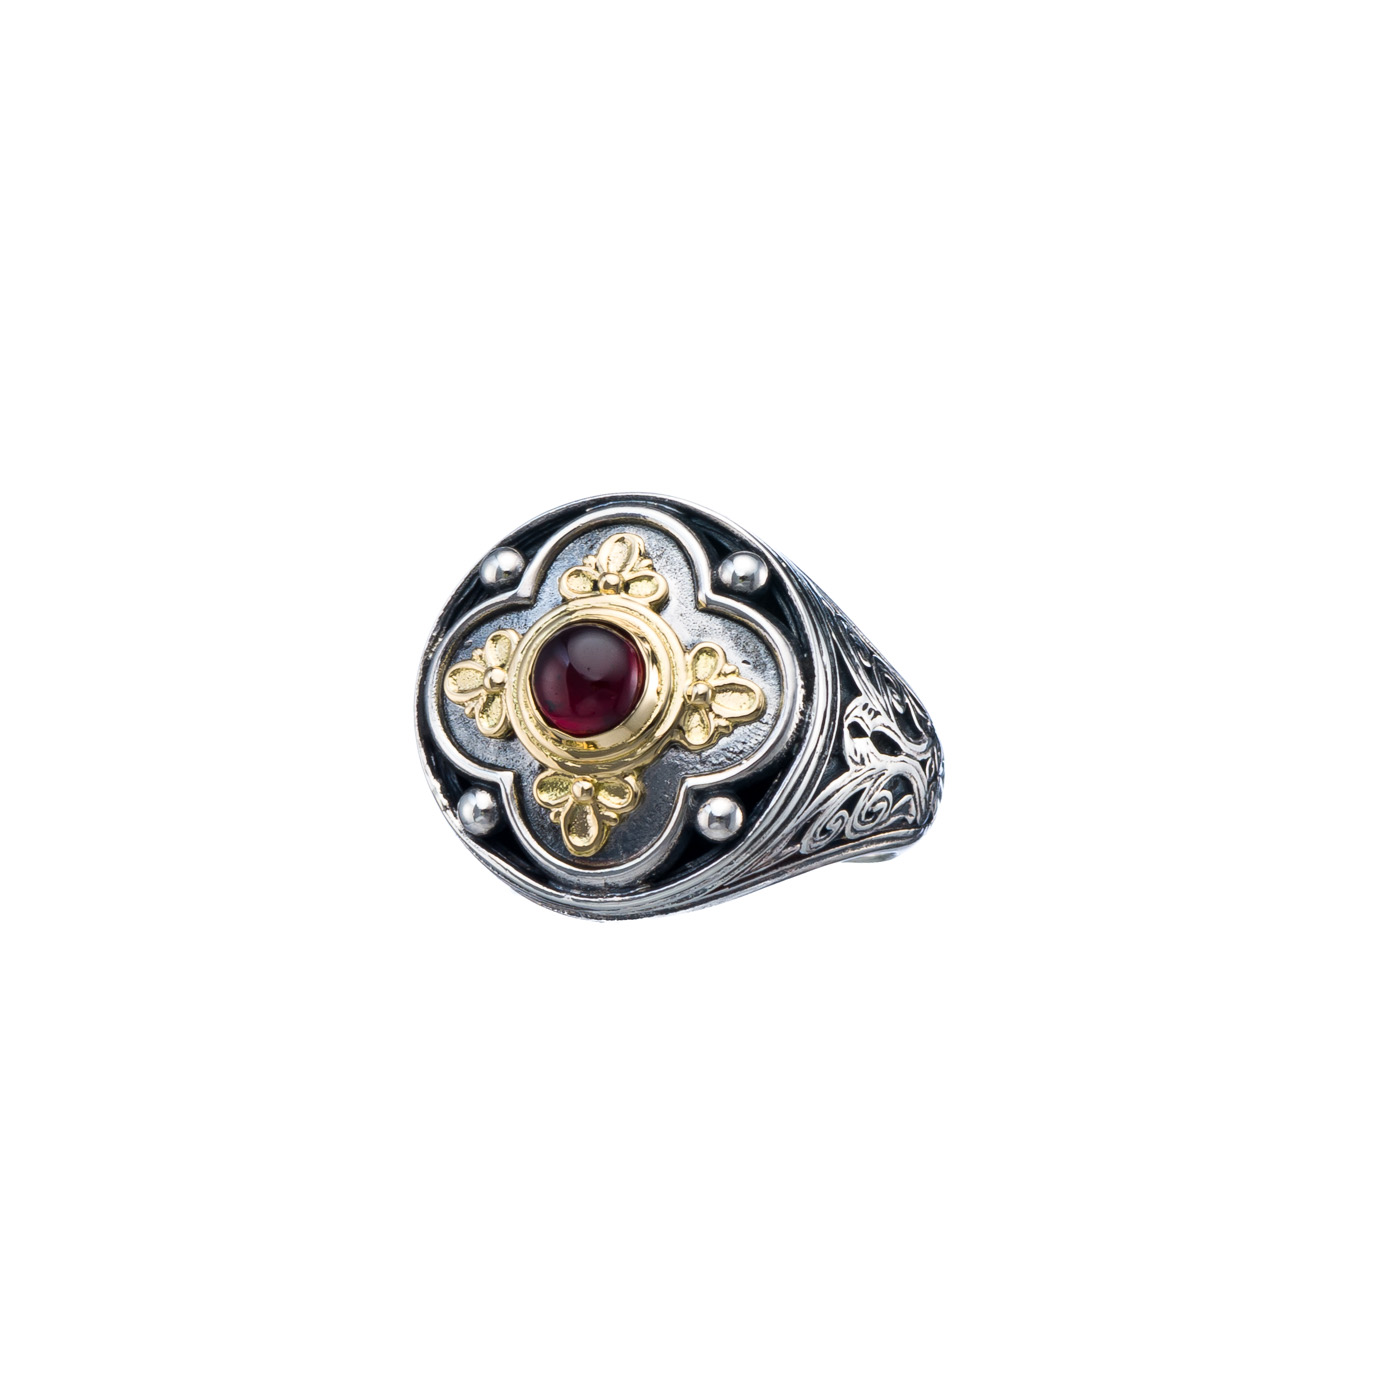 Athenian Flower Ring in 18K Gold and Sterling Silver with garnet